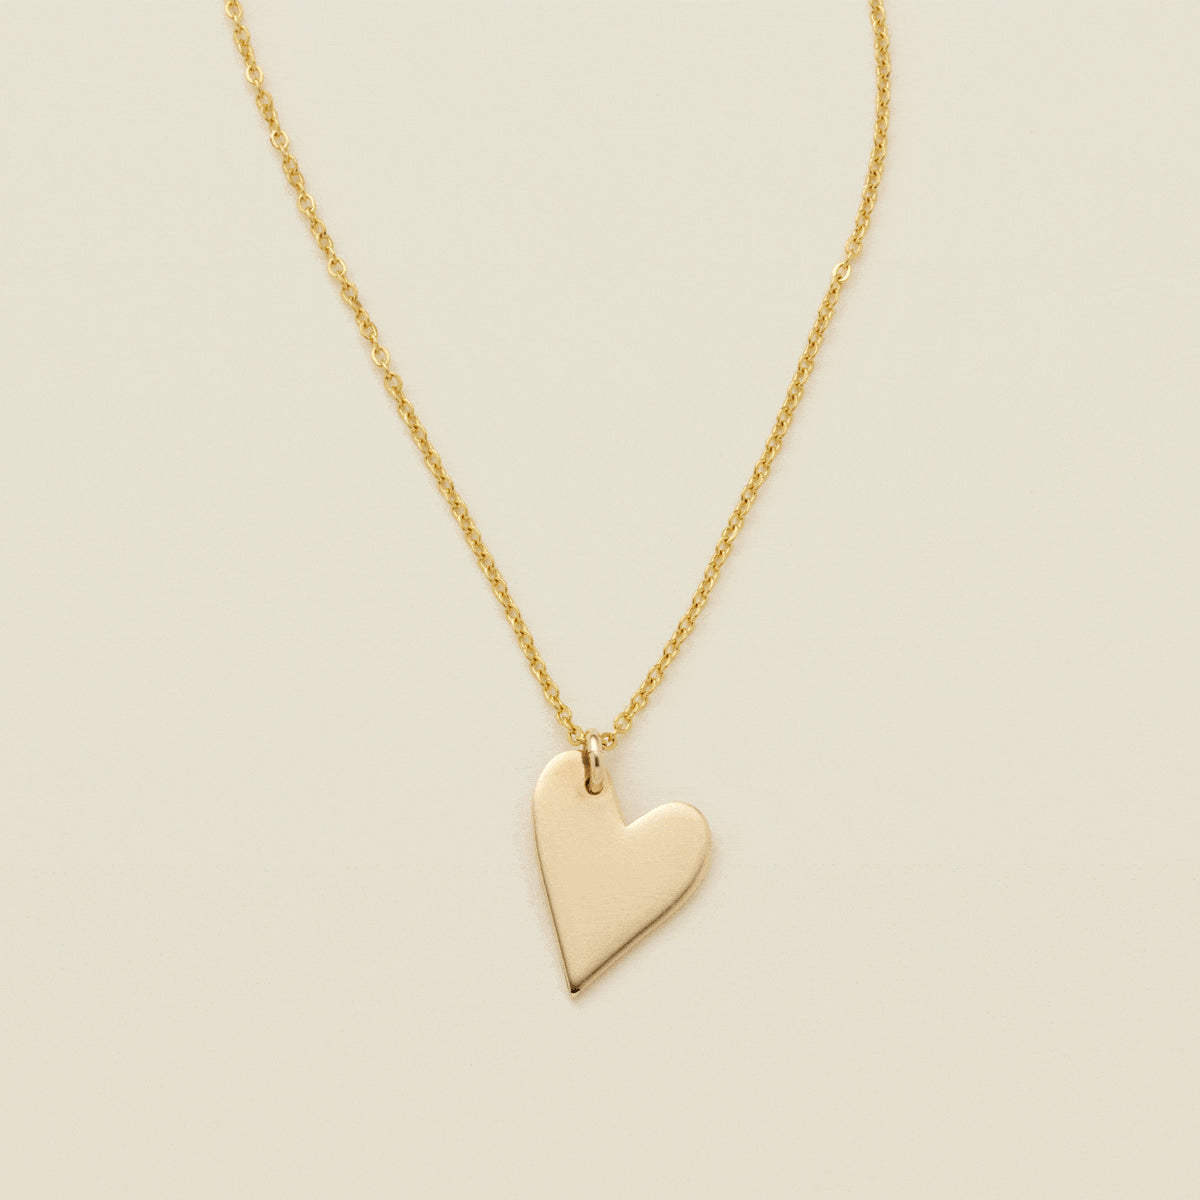 Sweetheart Initial Necklace Rose Gold Filled / 16-18